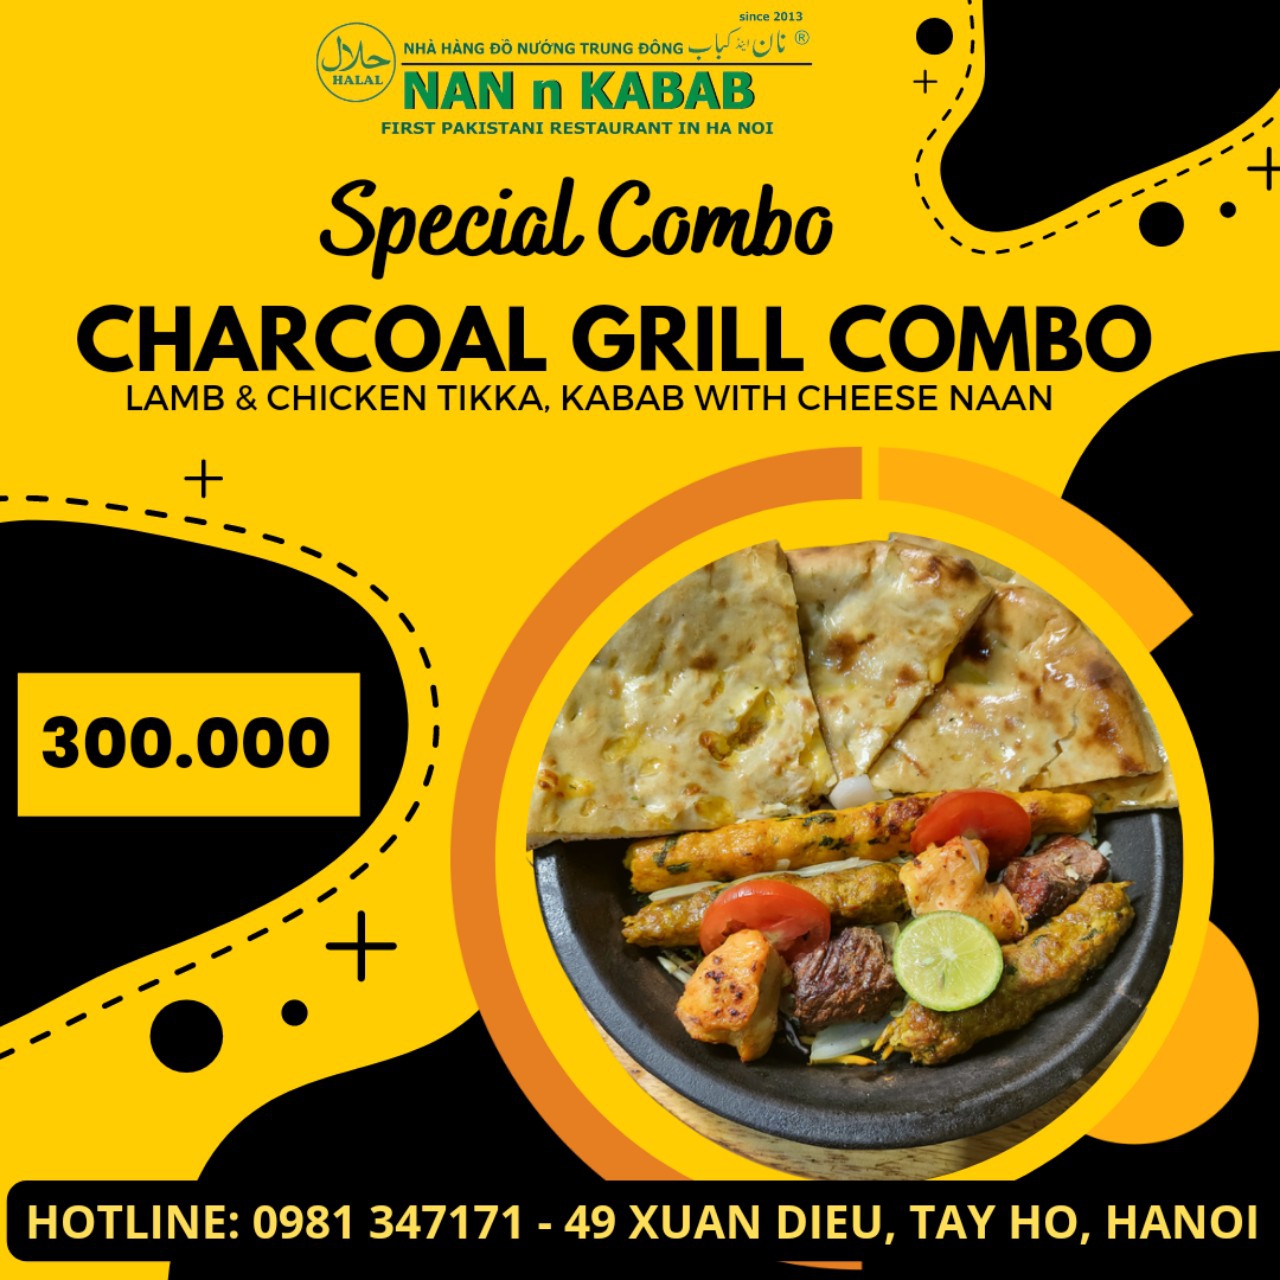 Special charcoal grill combo